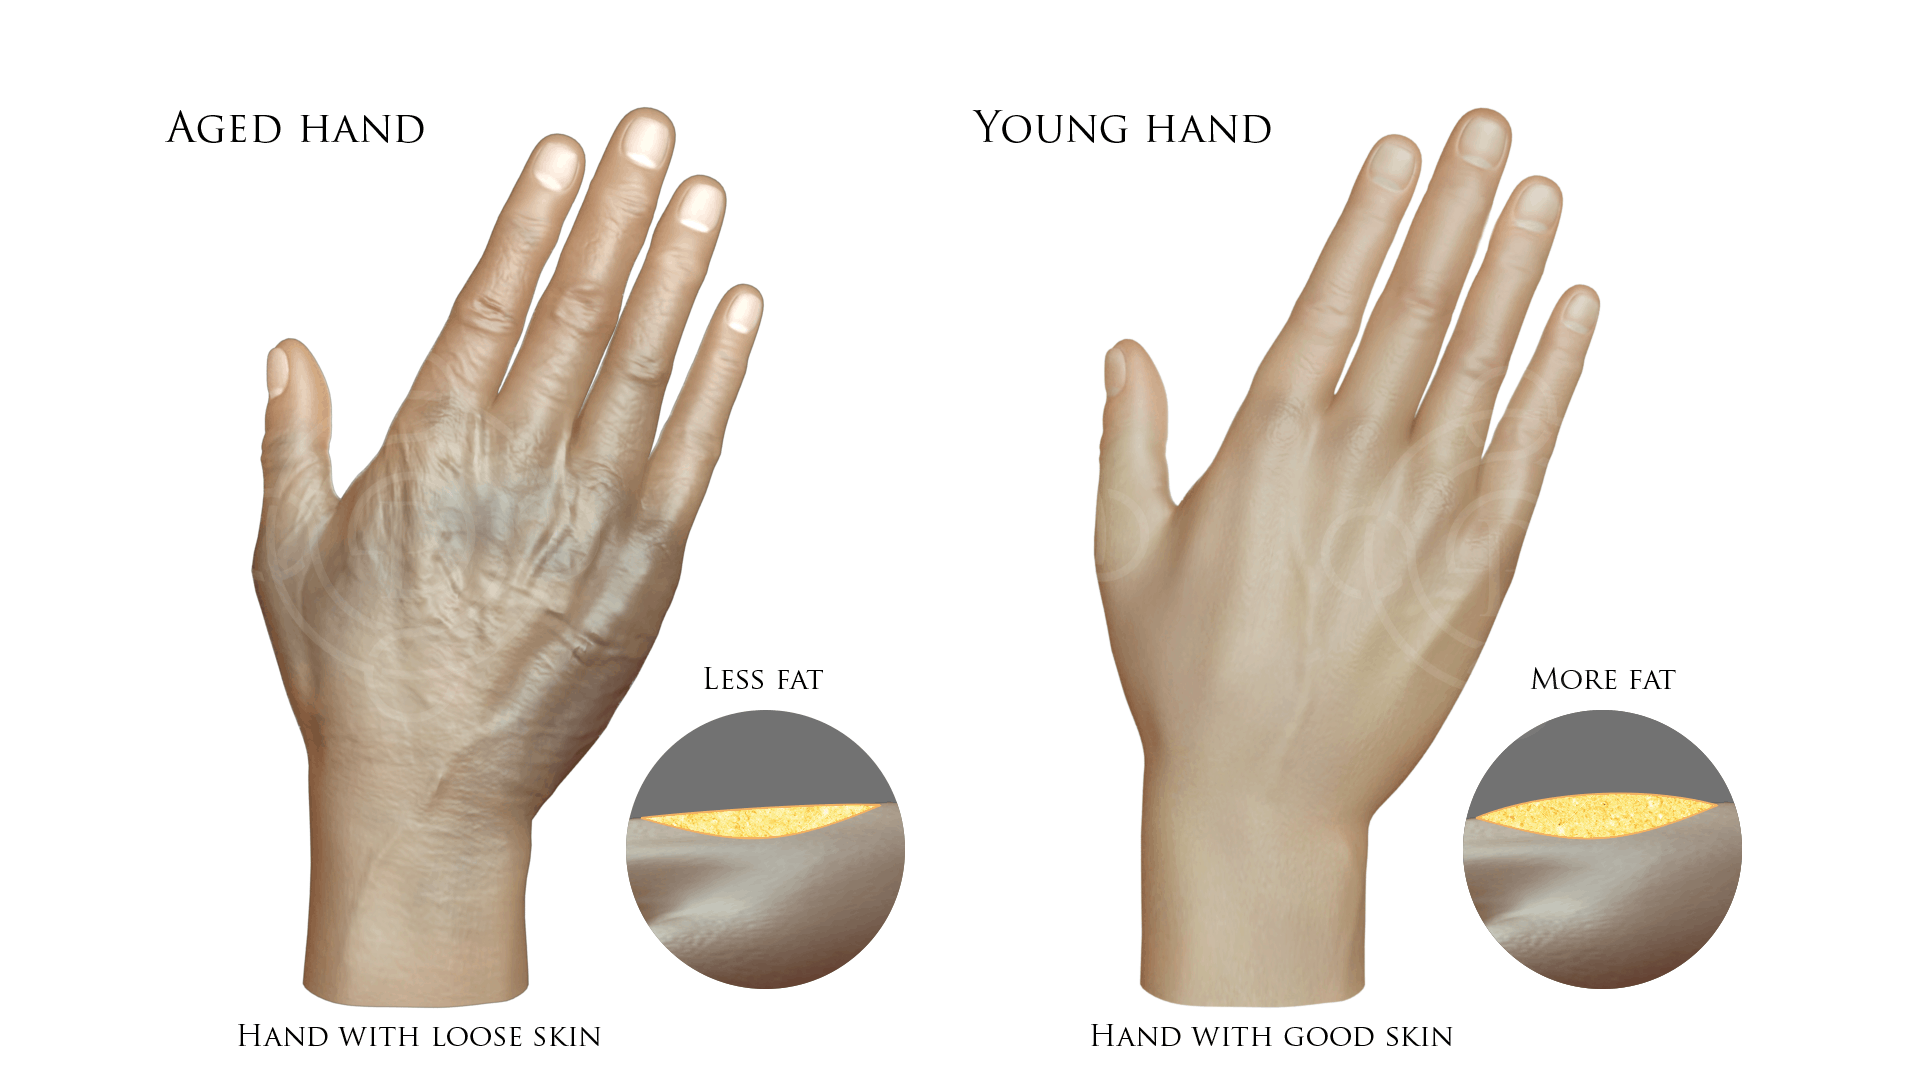 Hand Rejuvenation : Aged Hand with Loose Skin and Less Fat vs Young Hand with Good Skin and More Fat